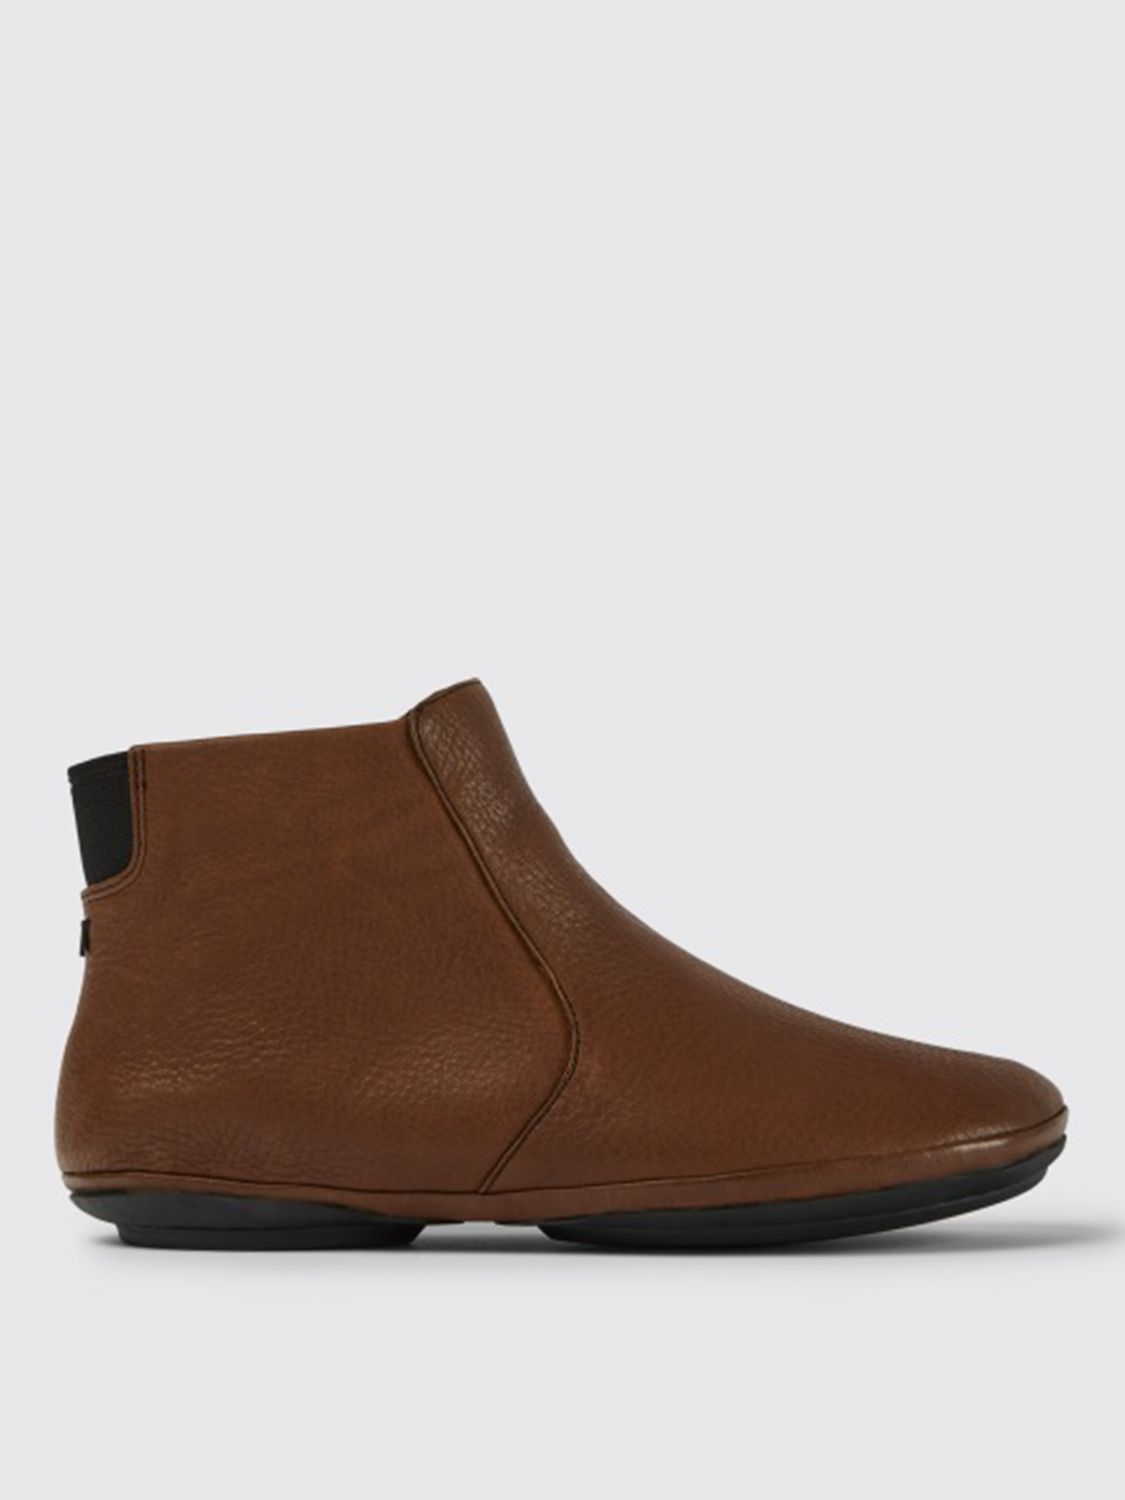 right camper ankle boots in calfskin